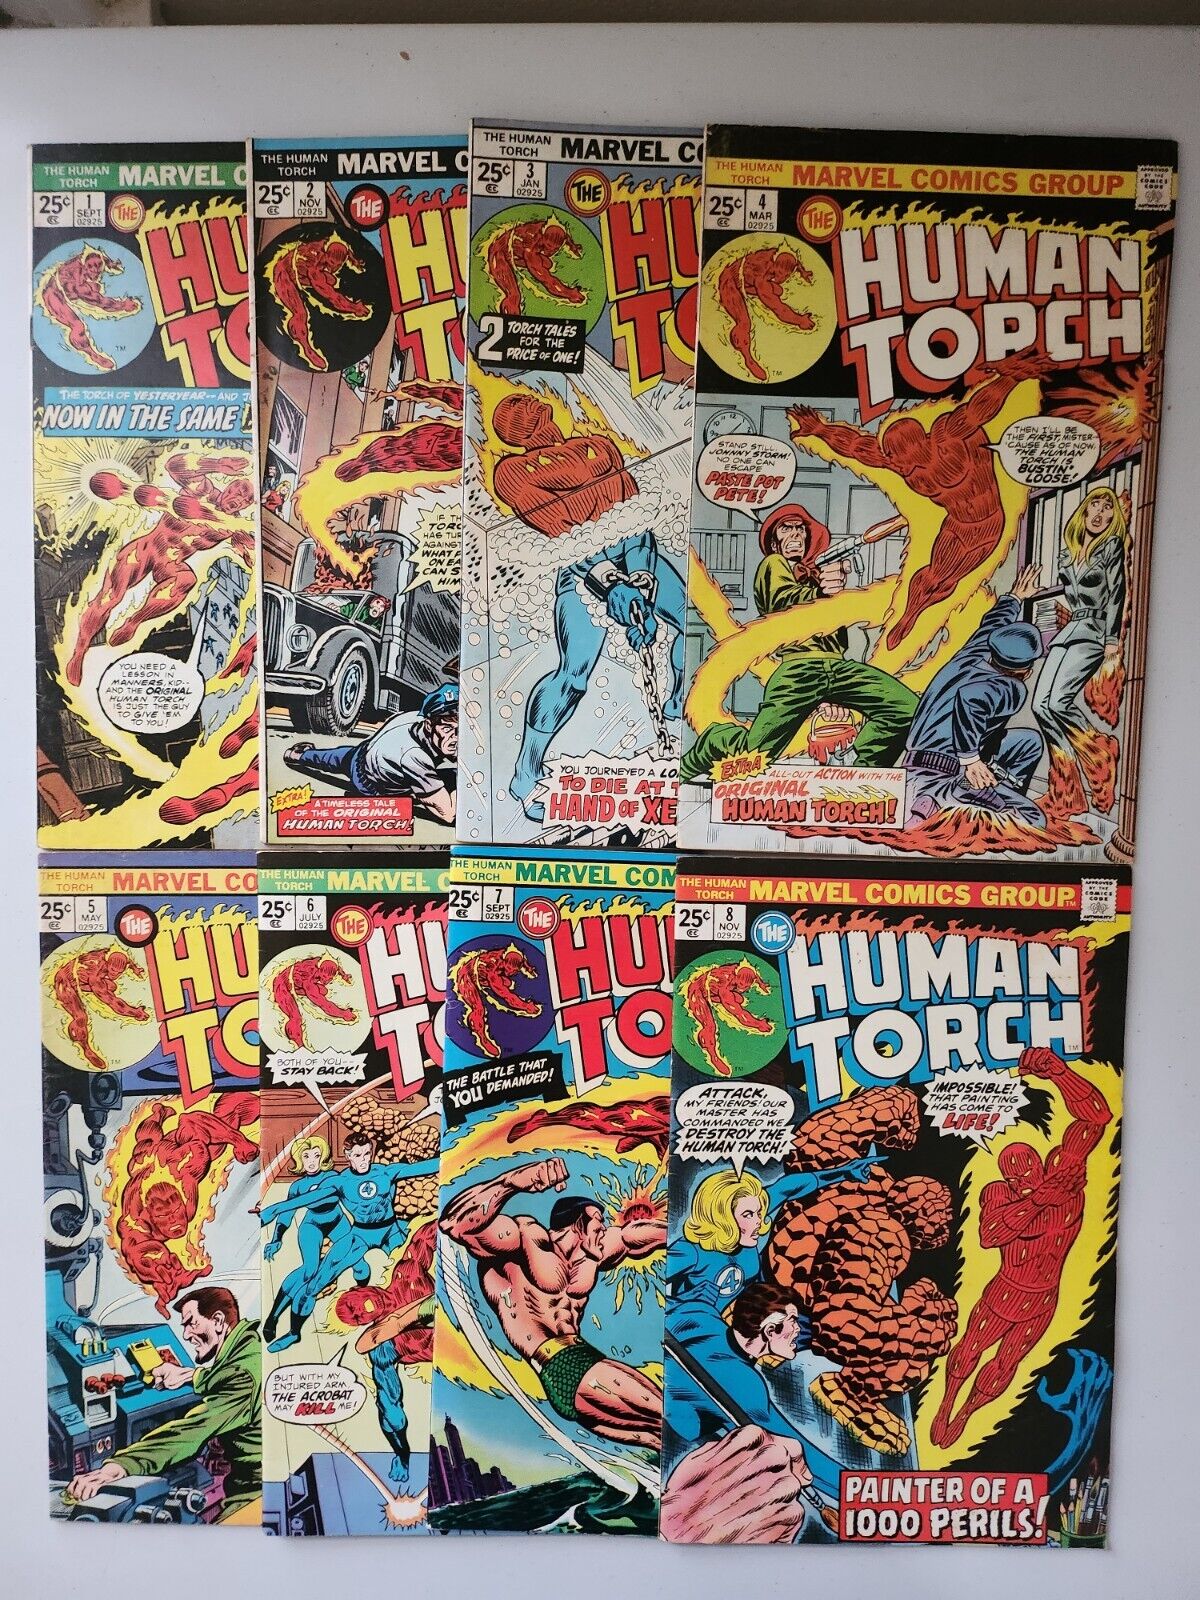 MARVEL GOLDEN/SILVER AGE HUMAN TORCH #1-8 FN/VF 1974 Reprint Books COMPLETE SET